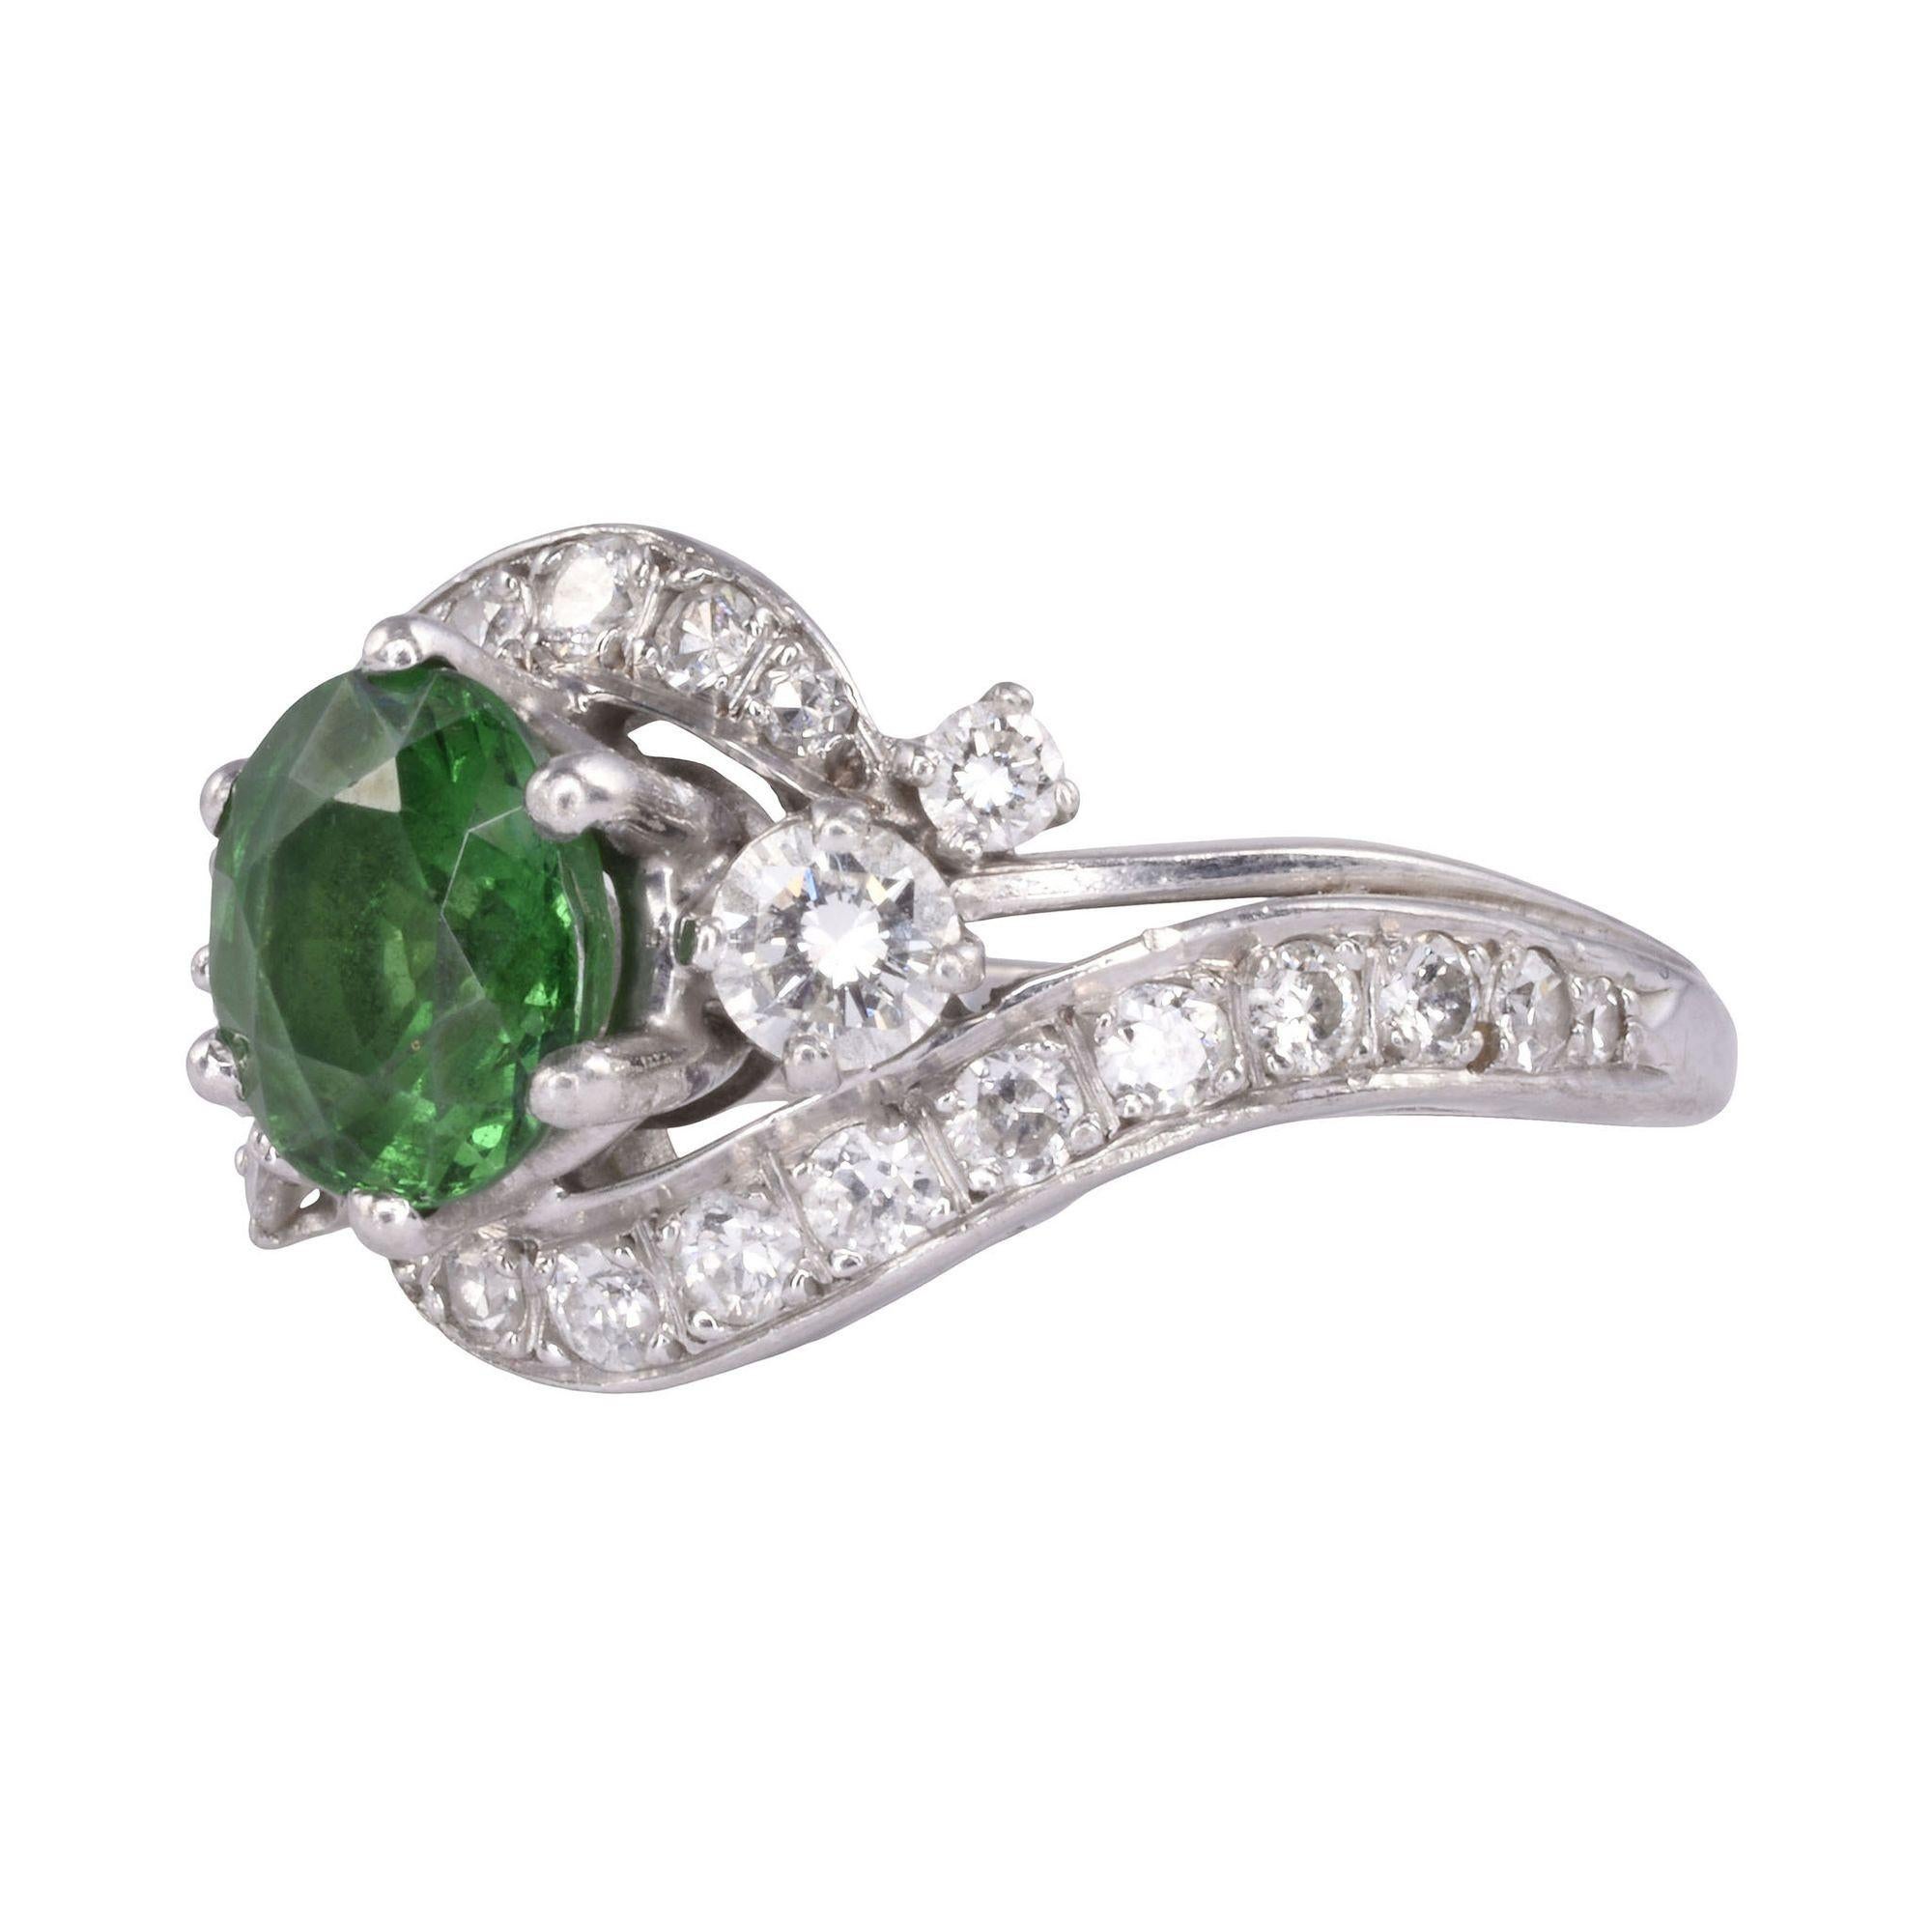 Estate very fine quality tsavorite diamond platinum ring. This platinum ring features a 1.35 carat center tsavorite garnet with very fine quality and color. It is accented with .68 carat total weight of diamonds having VS-SI clarity and H-I color.